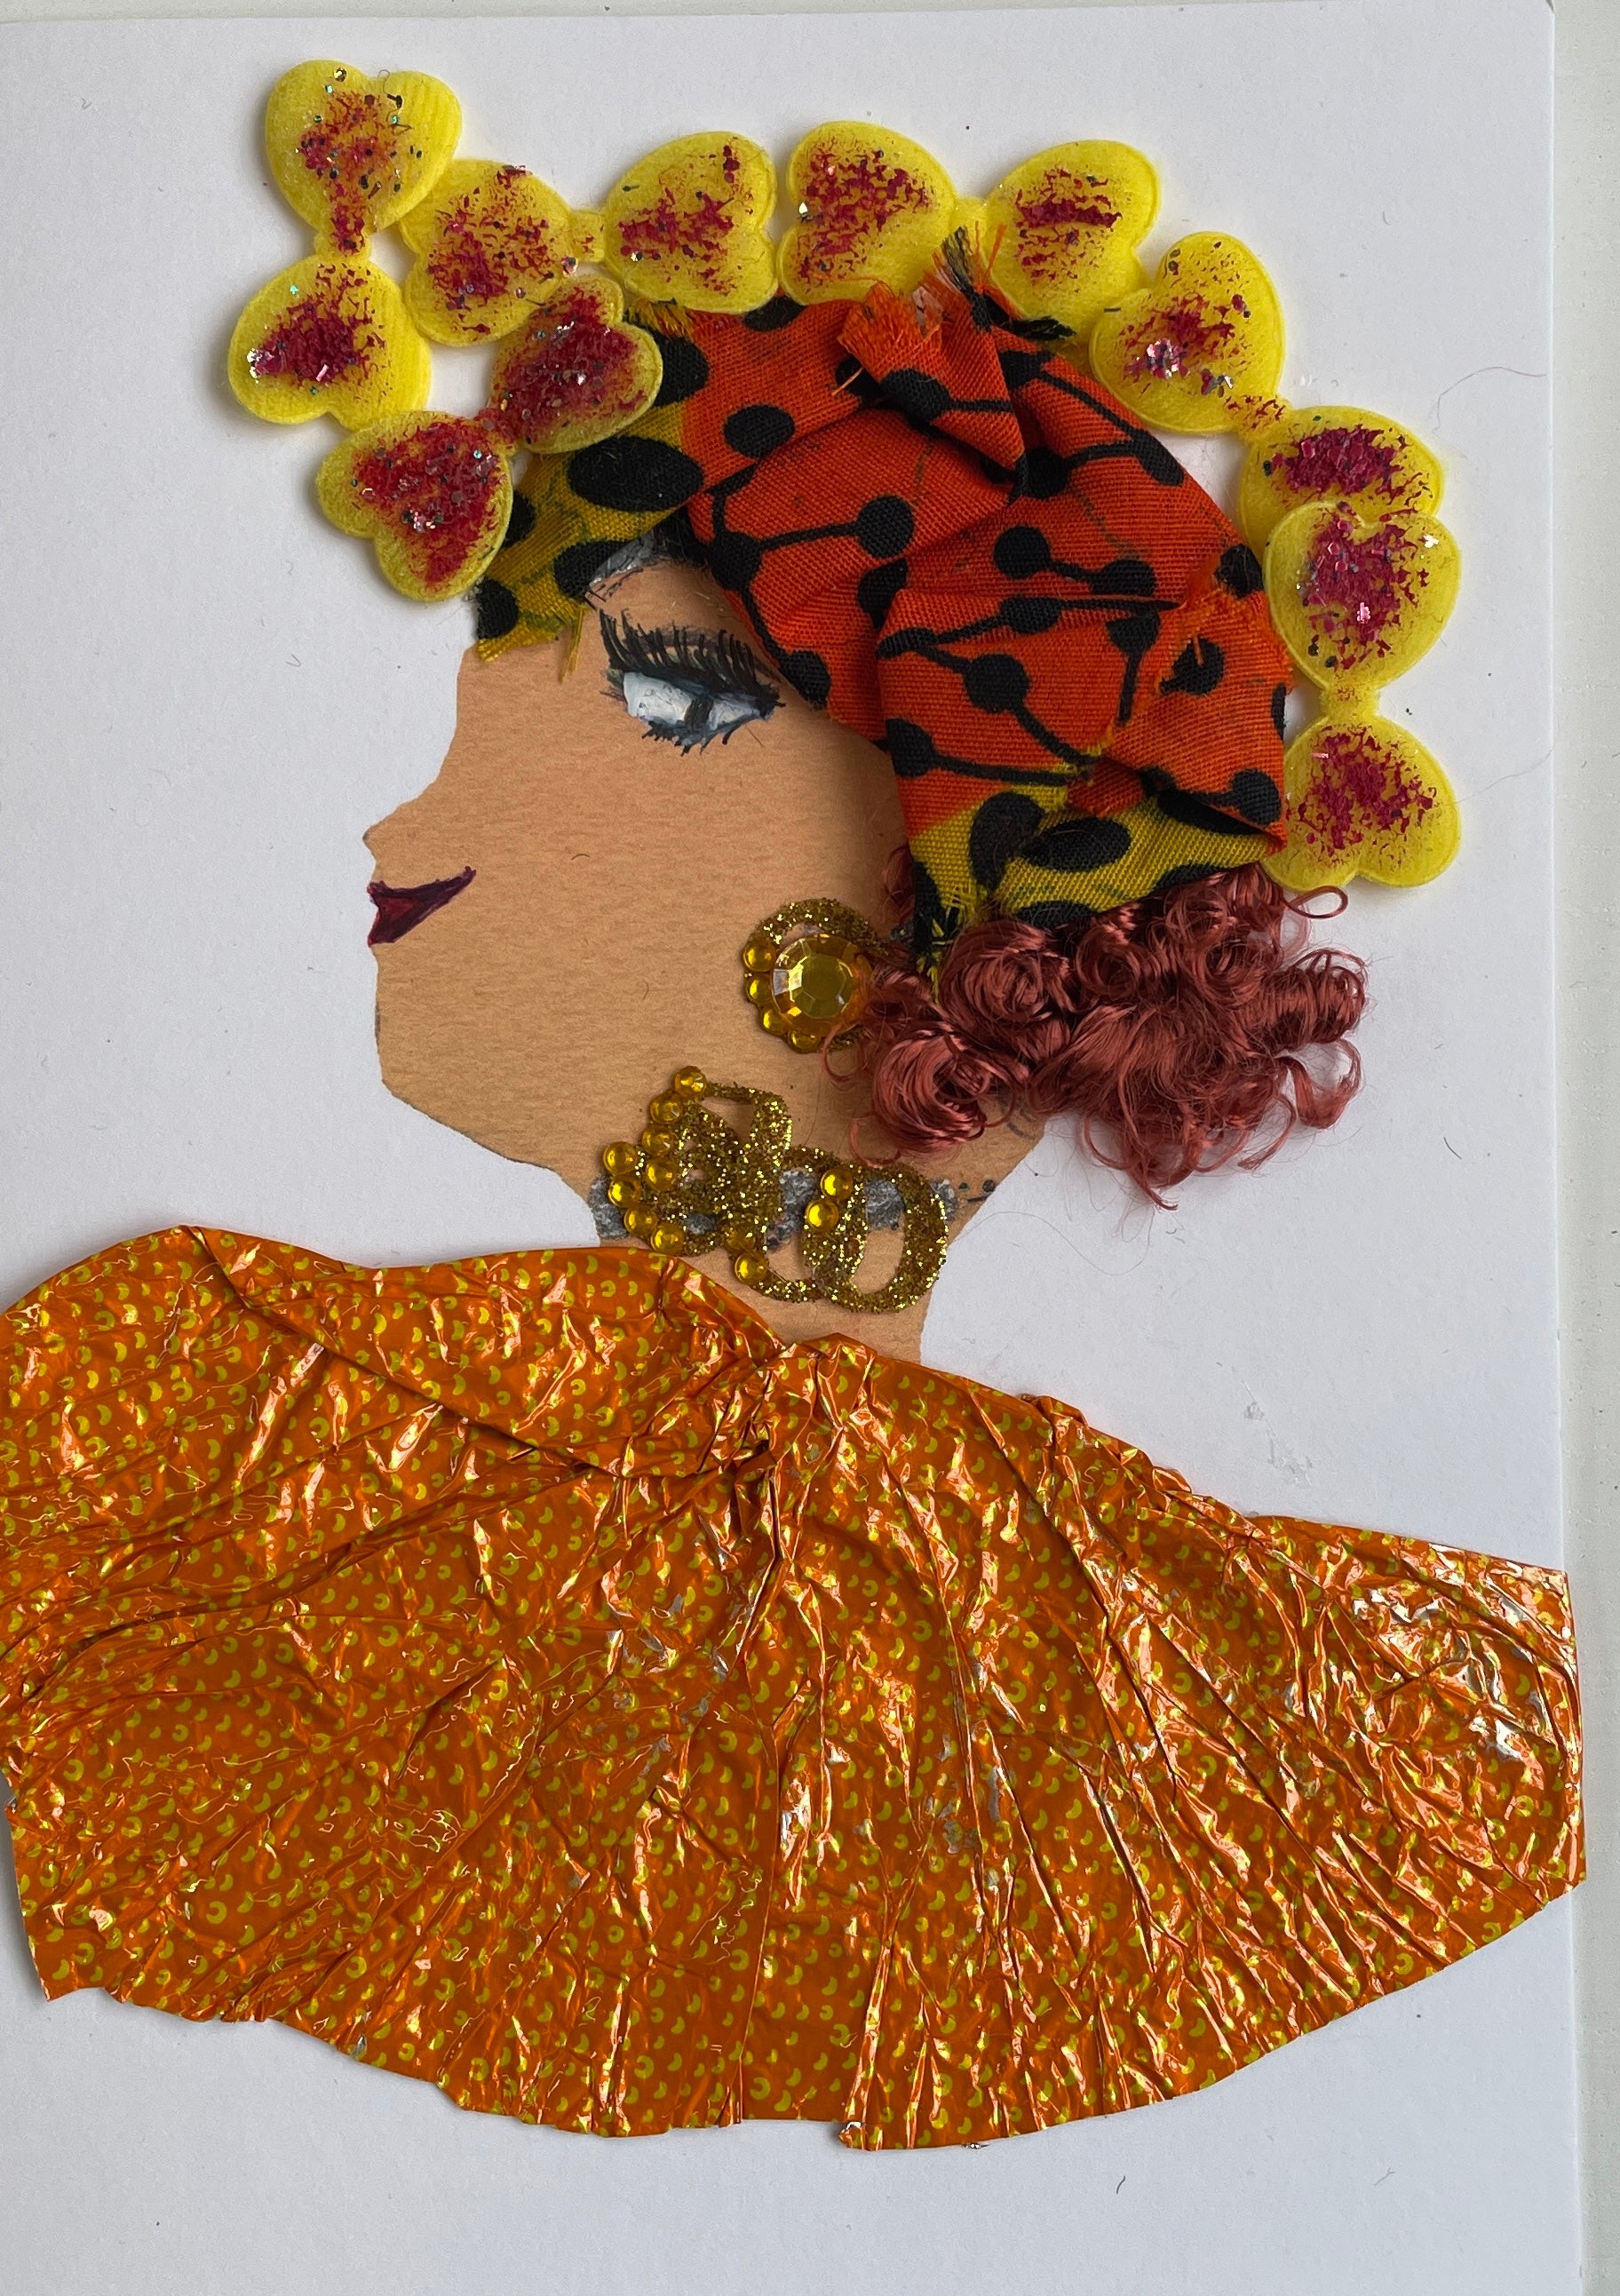 This image shows a woman called Brigadier. She wears a dress made of a metal material that is orange with small yellow designs on it. Her necklace and earrings are both a combination of silver and gold. Her deep red hair peeks out the bottom of her headscarf which is orange and yellow with a black pattern on it. There are small yellow bows around the headscarf, each covered with red glitter.